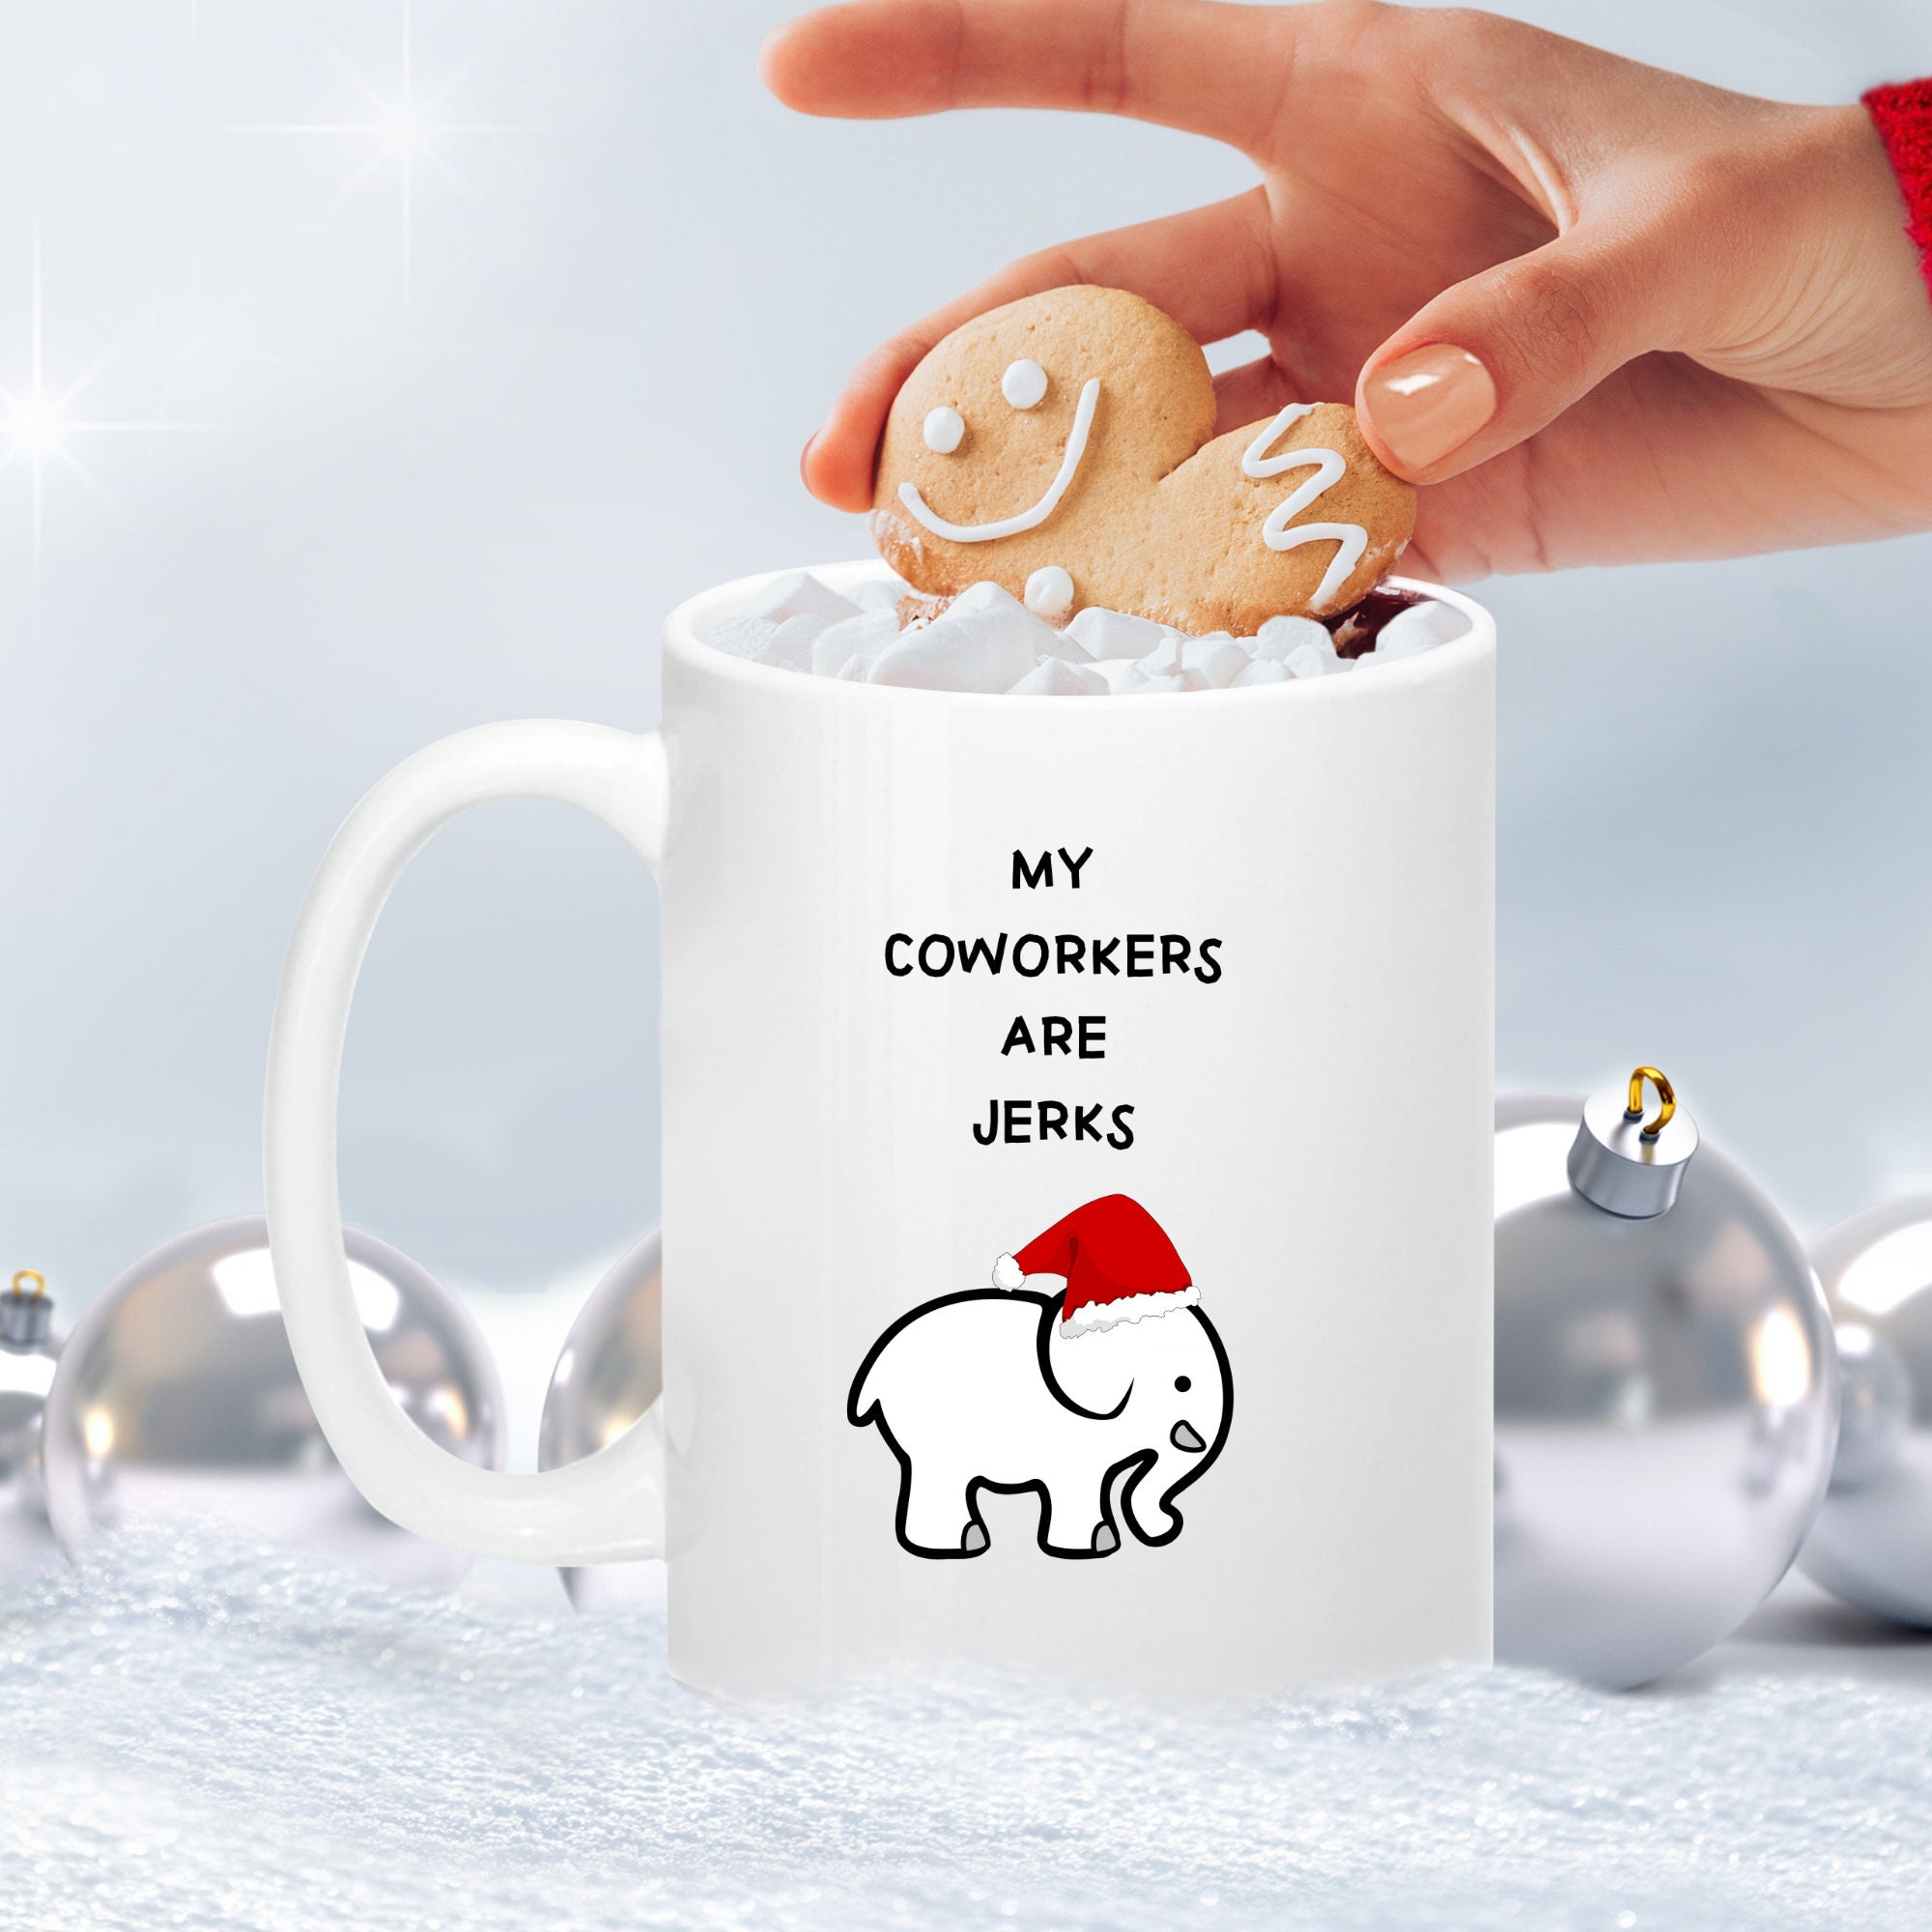 Funny White Elephant Gifts, White Elephant Party Gift Exchange Ideas,  Coworker Coffee Mug